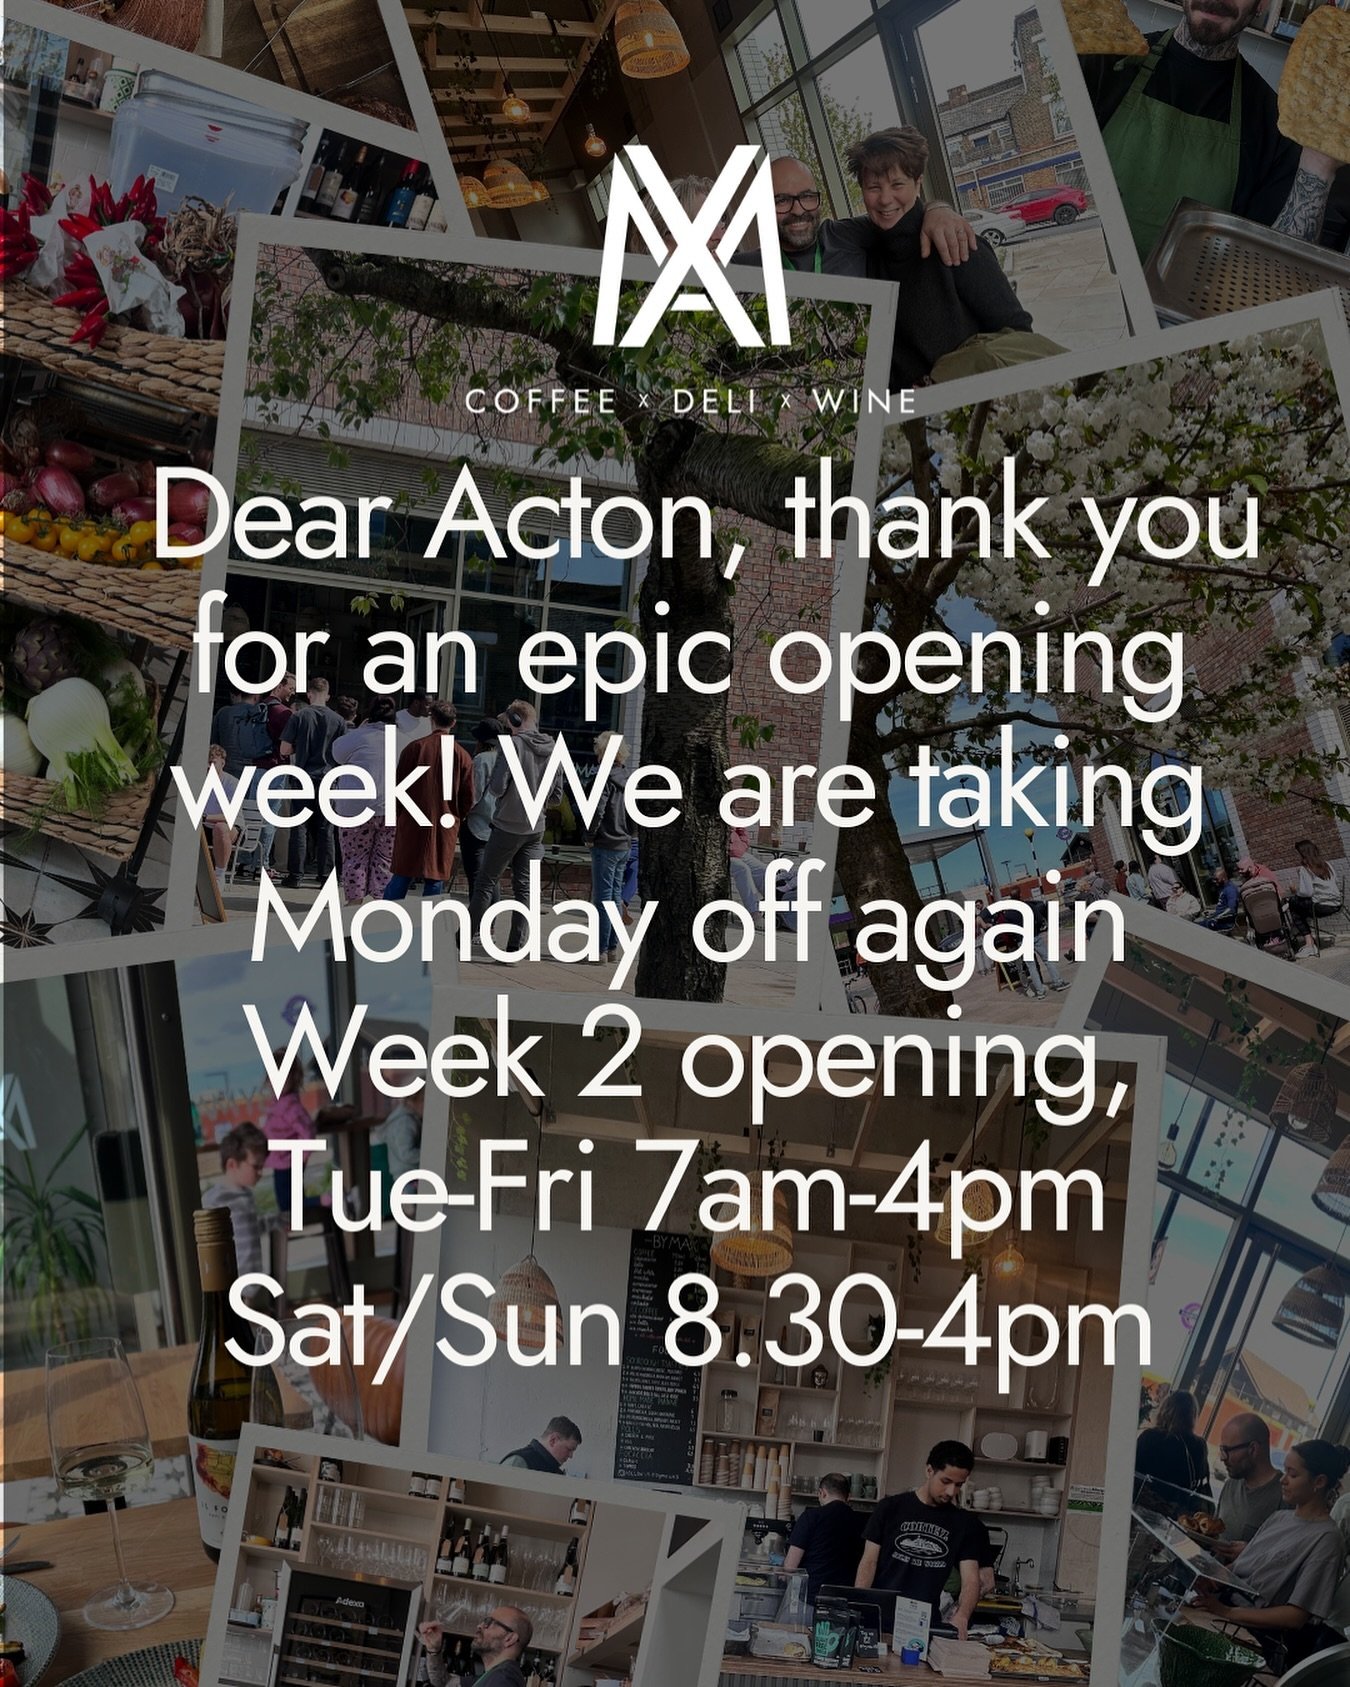 HUGE thank you to everyone who visited us during our grand opening week! After a whirlwind first week, we are feeling grateful but also exhausted. To recharge and strategise, we will be closed on Monday. Our operating hours for this week will be 7am 